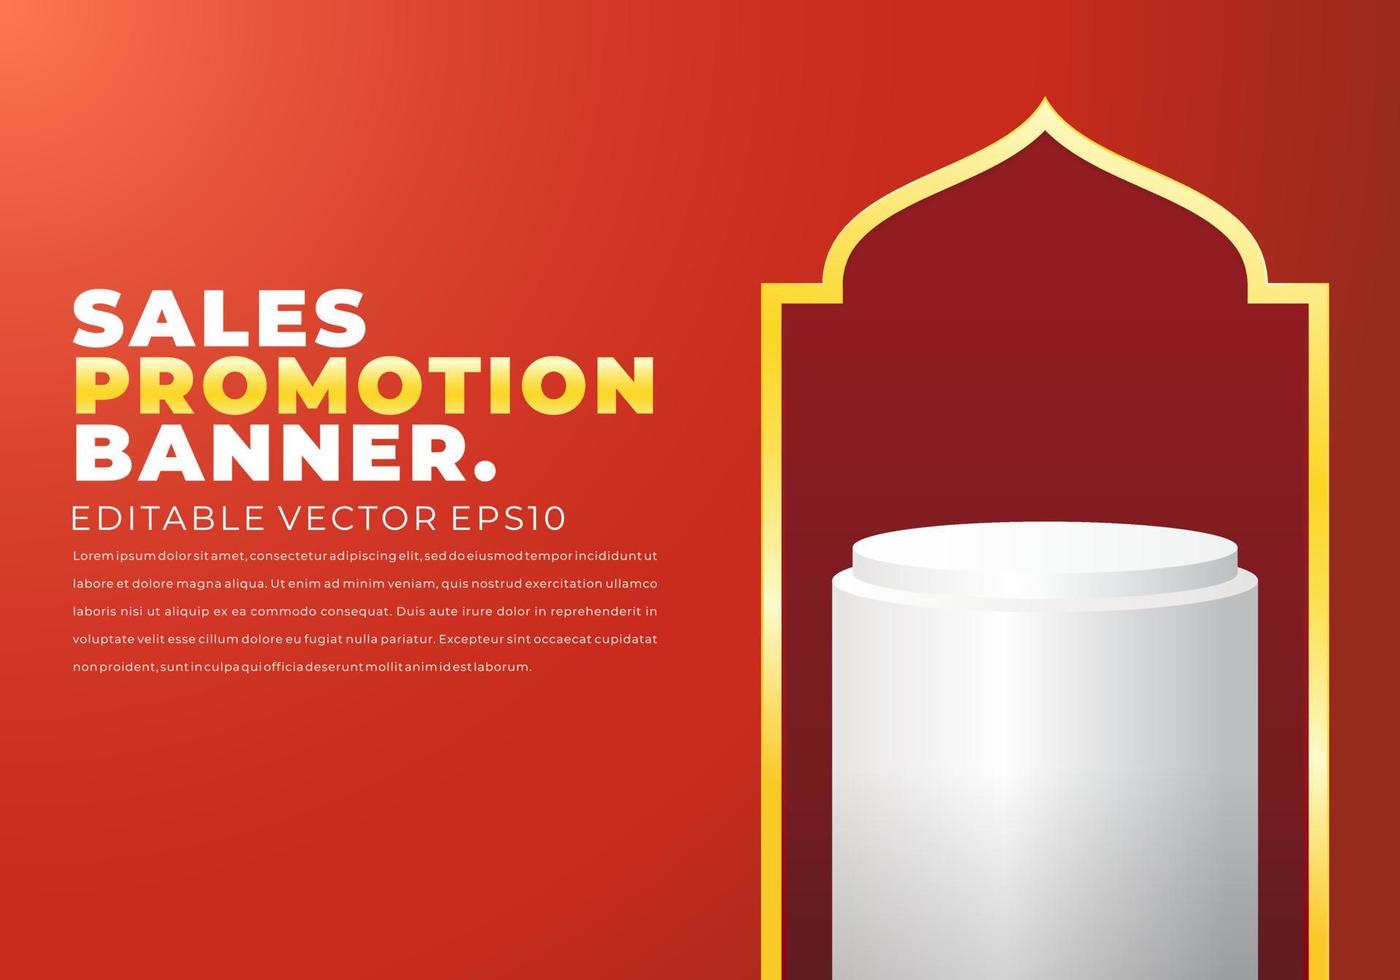 Sales promotion banner for ramadan sale with circle pedestal, plinth, pillar or display stage. vector